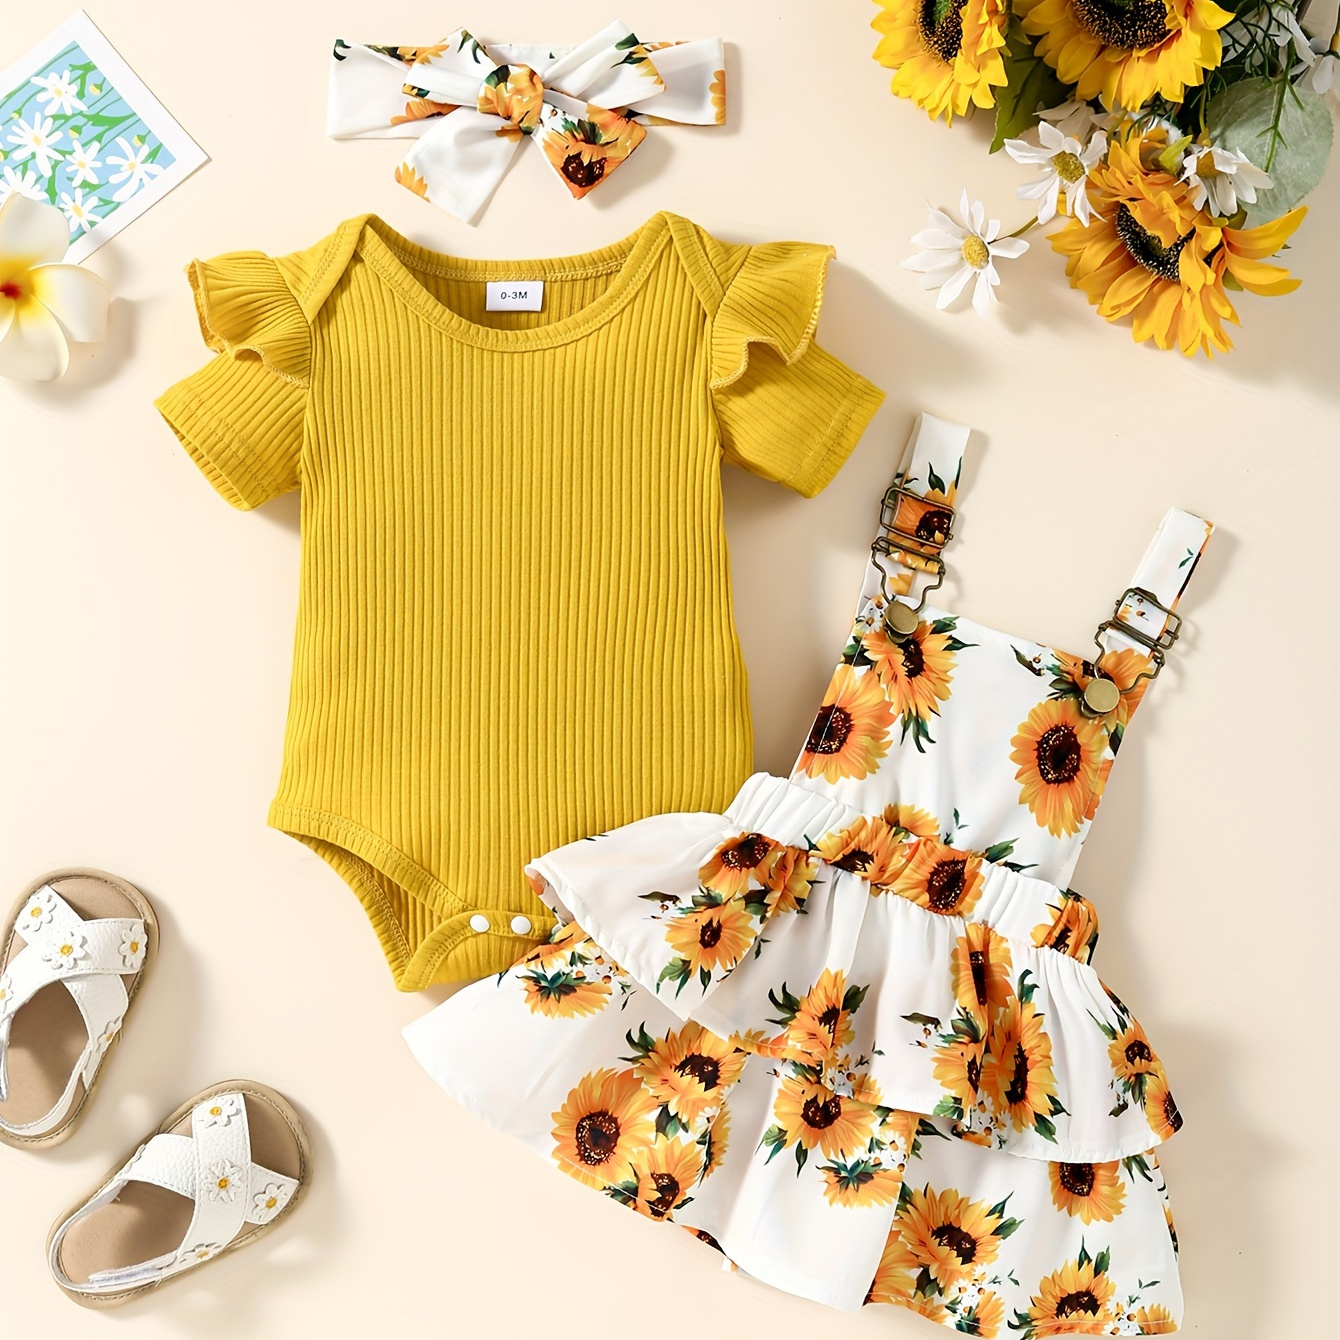 

Baby Girls Clothing Short Sleeve Ribbed Romper Sunflower Suspender Skirt Overall Dress Outfit With Headband Set